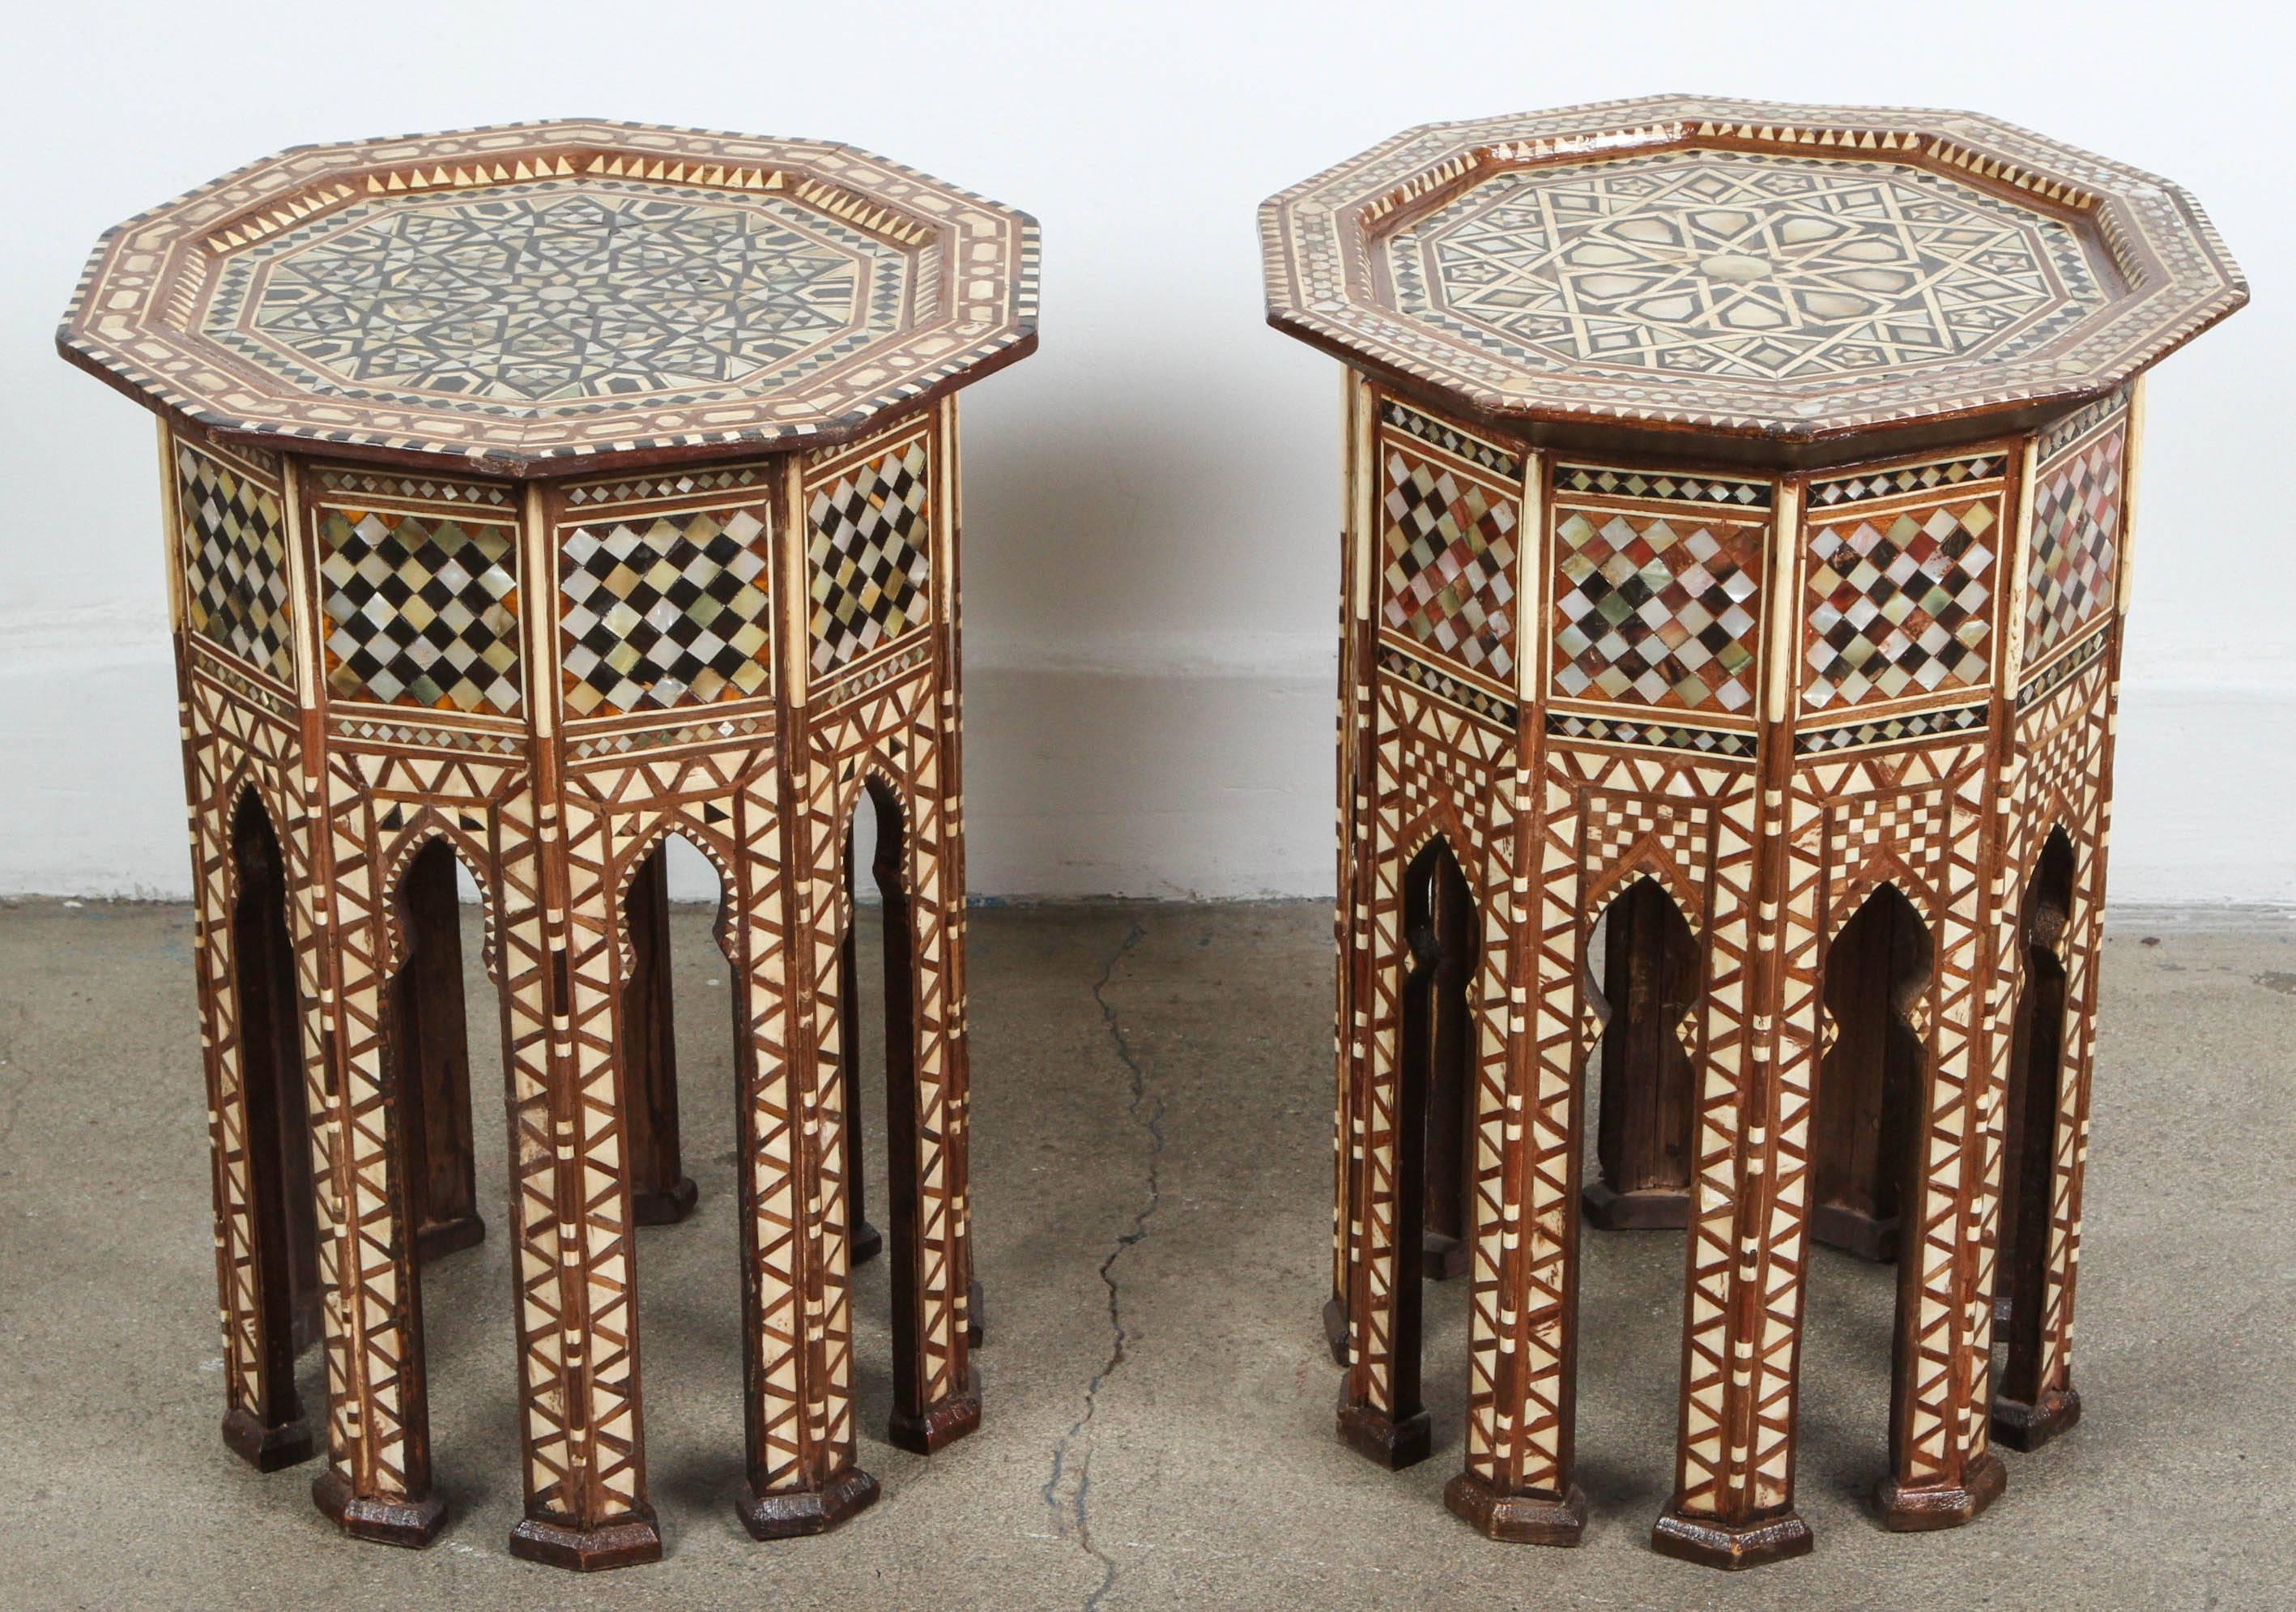 Set of two of Syrian walnut octagonal side tables inlaid with mother-of-pearl, ebony, horn and camel bone.
Moorish arches on the eight sides,
Handcrafted by skilled artisans in the Middle East, Damascus Syria.
Great addition for any Moroccan room